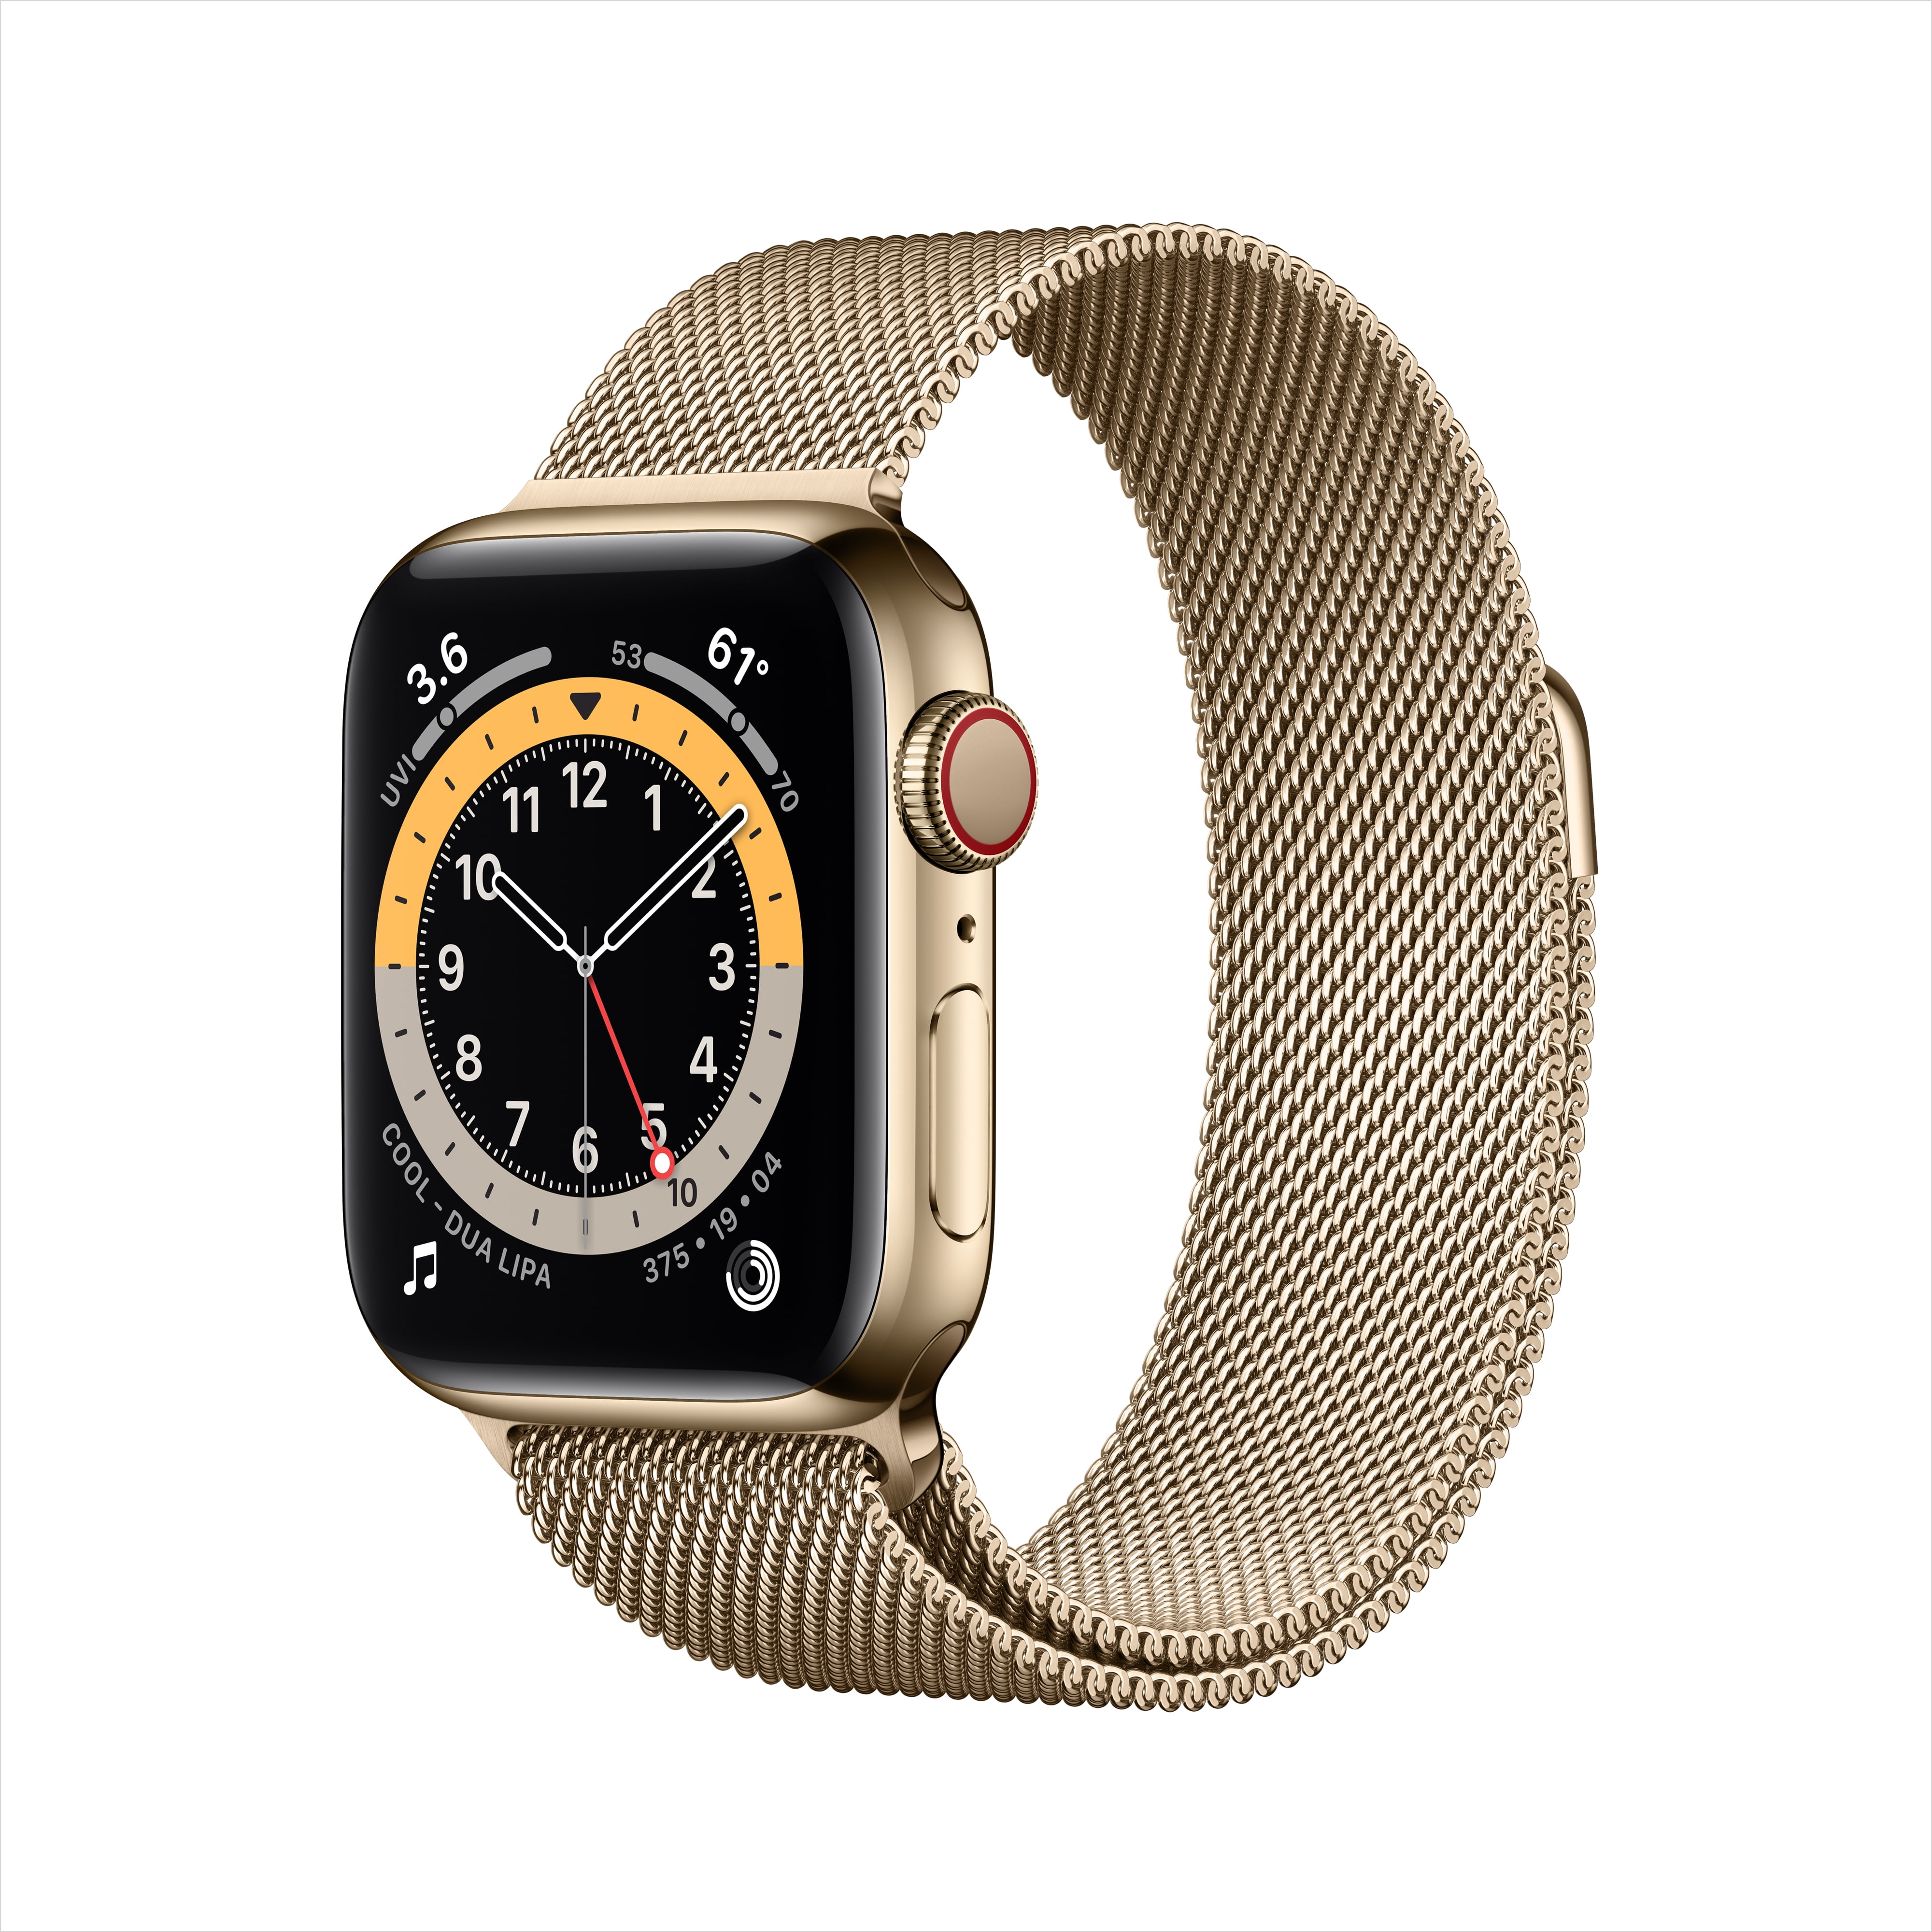 Apple Watch Series 6 GPS + Cellular, 44mm Gold Aluminum Case with 